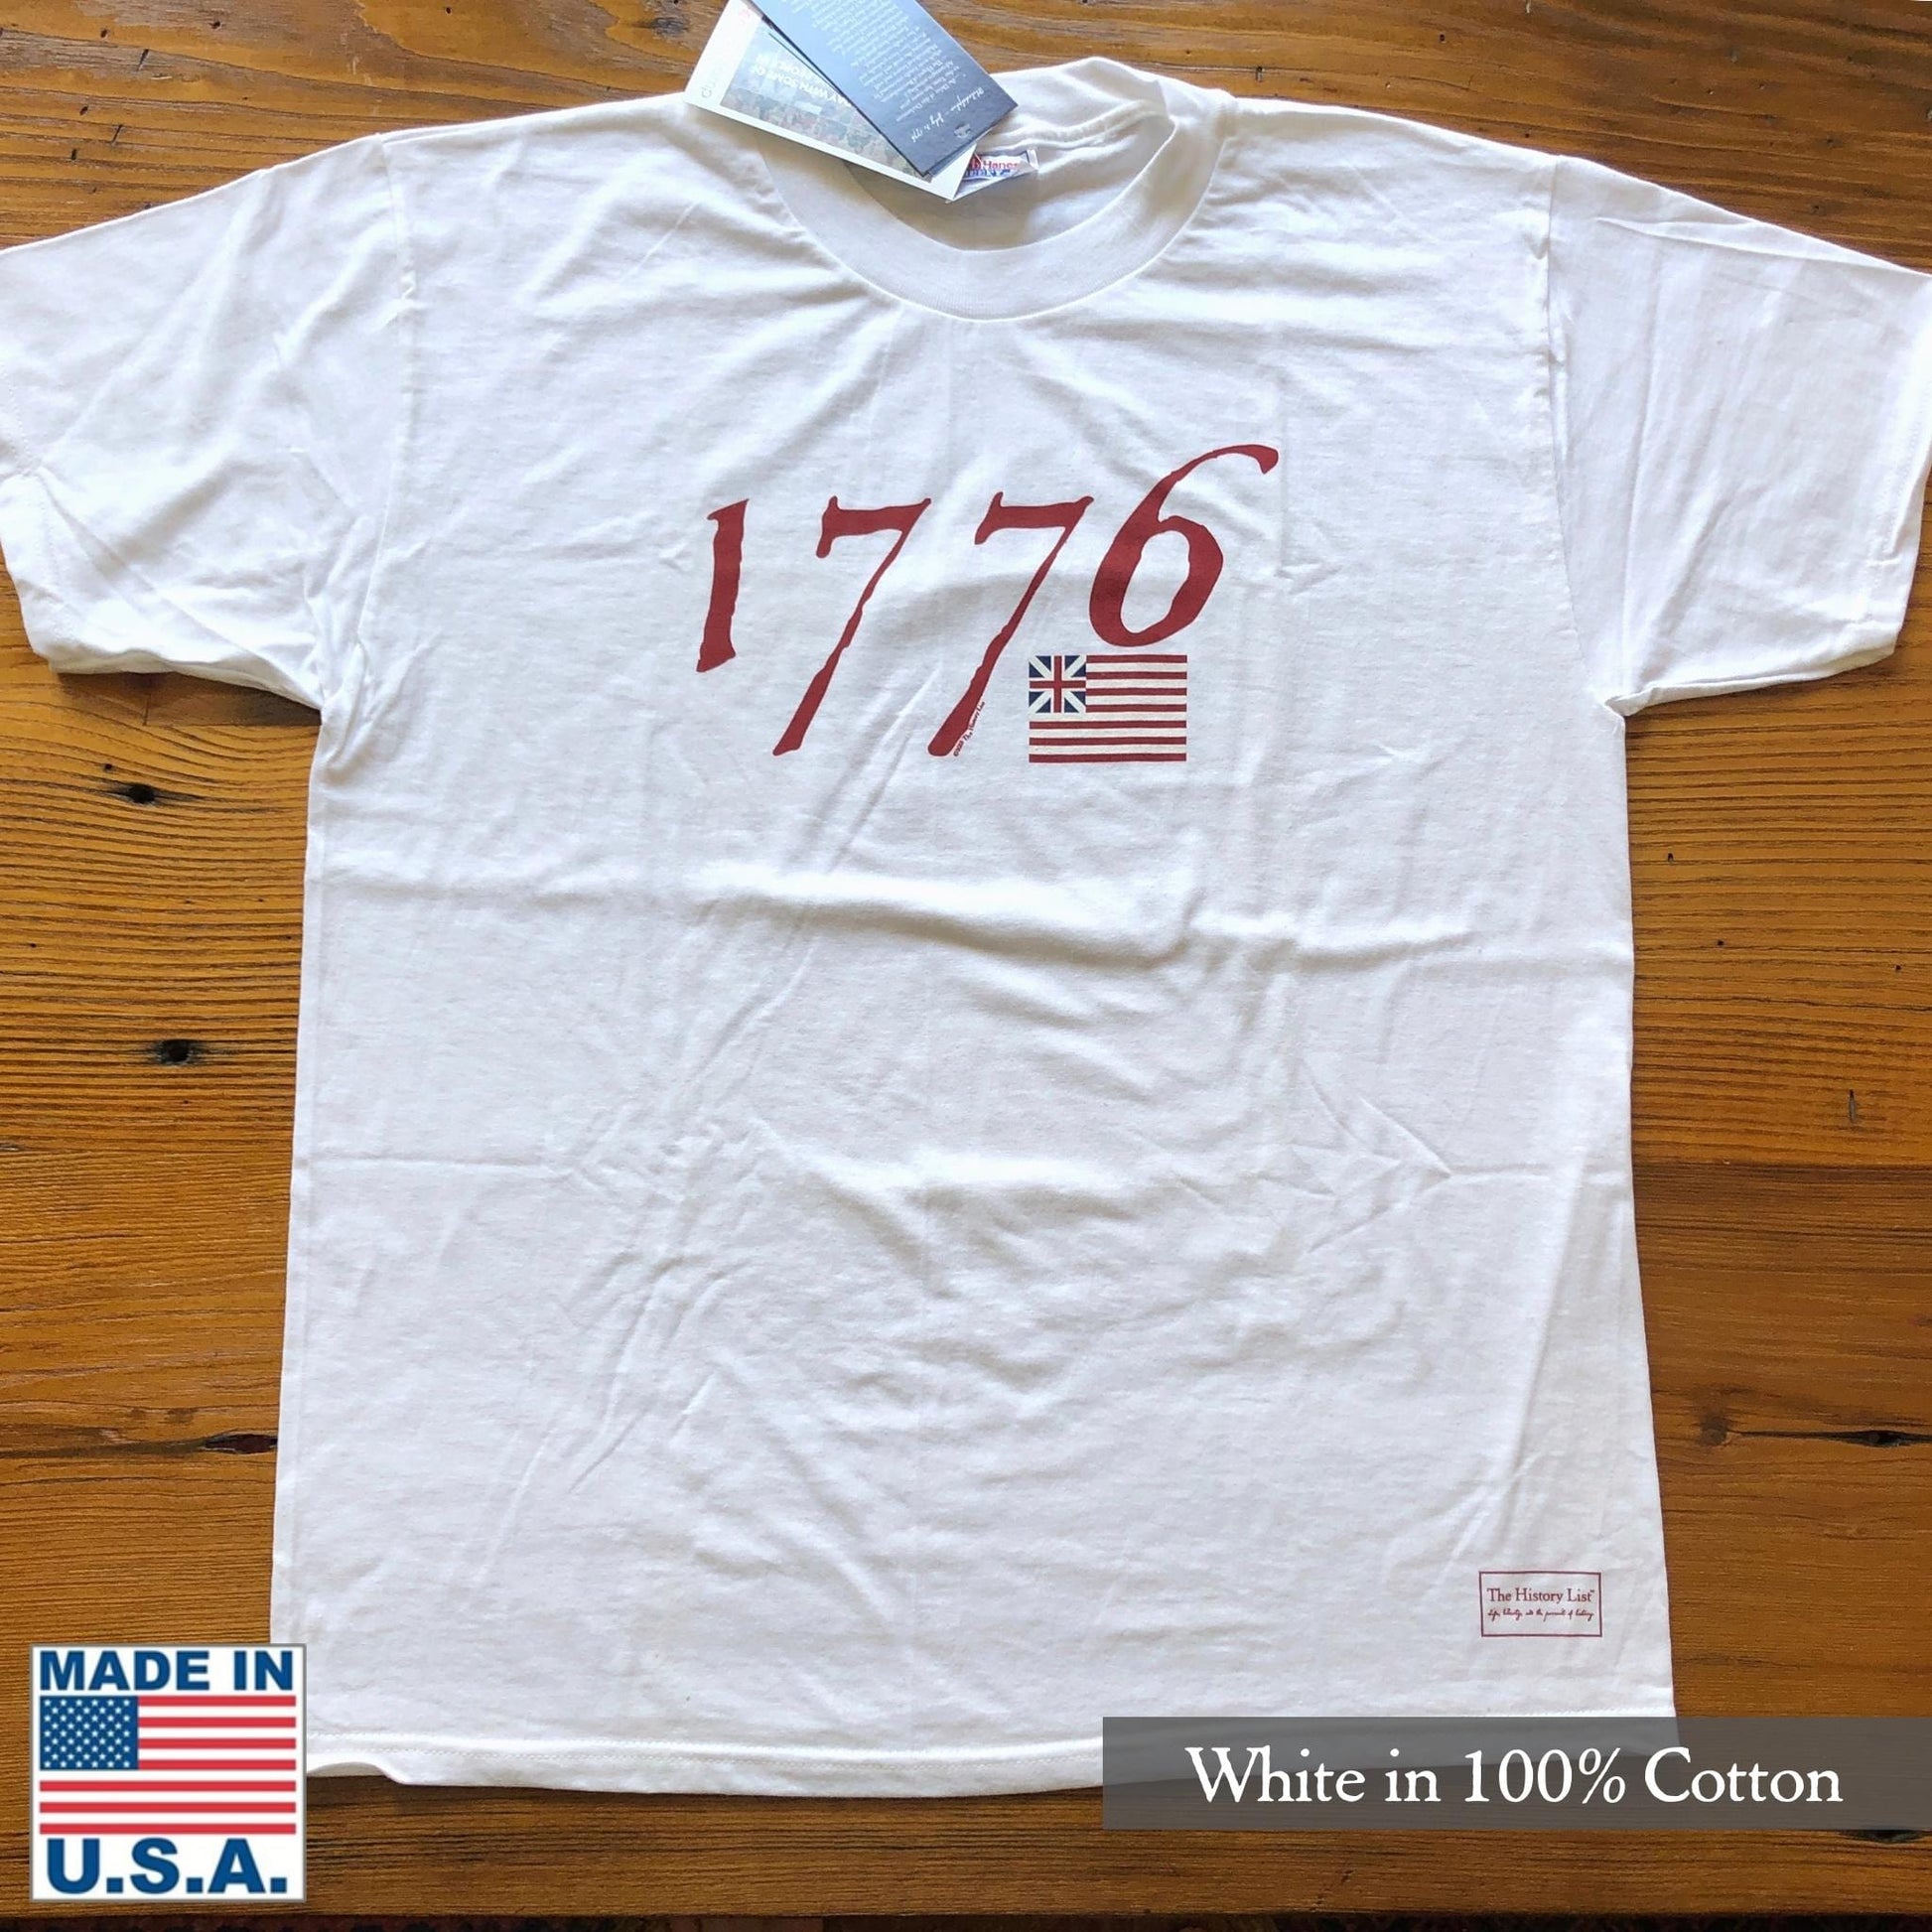 "We hold these truths - July 4, 1776” T-shirt from The History List store in White